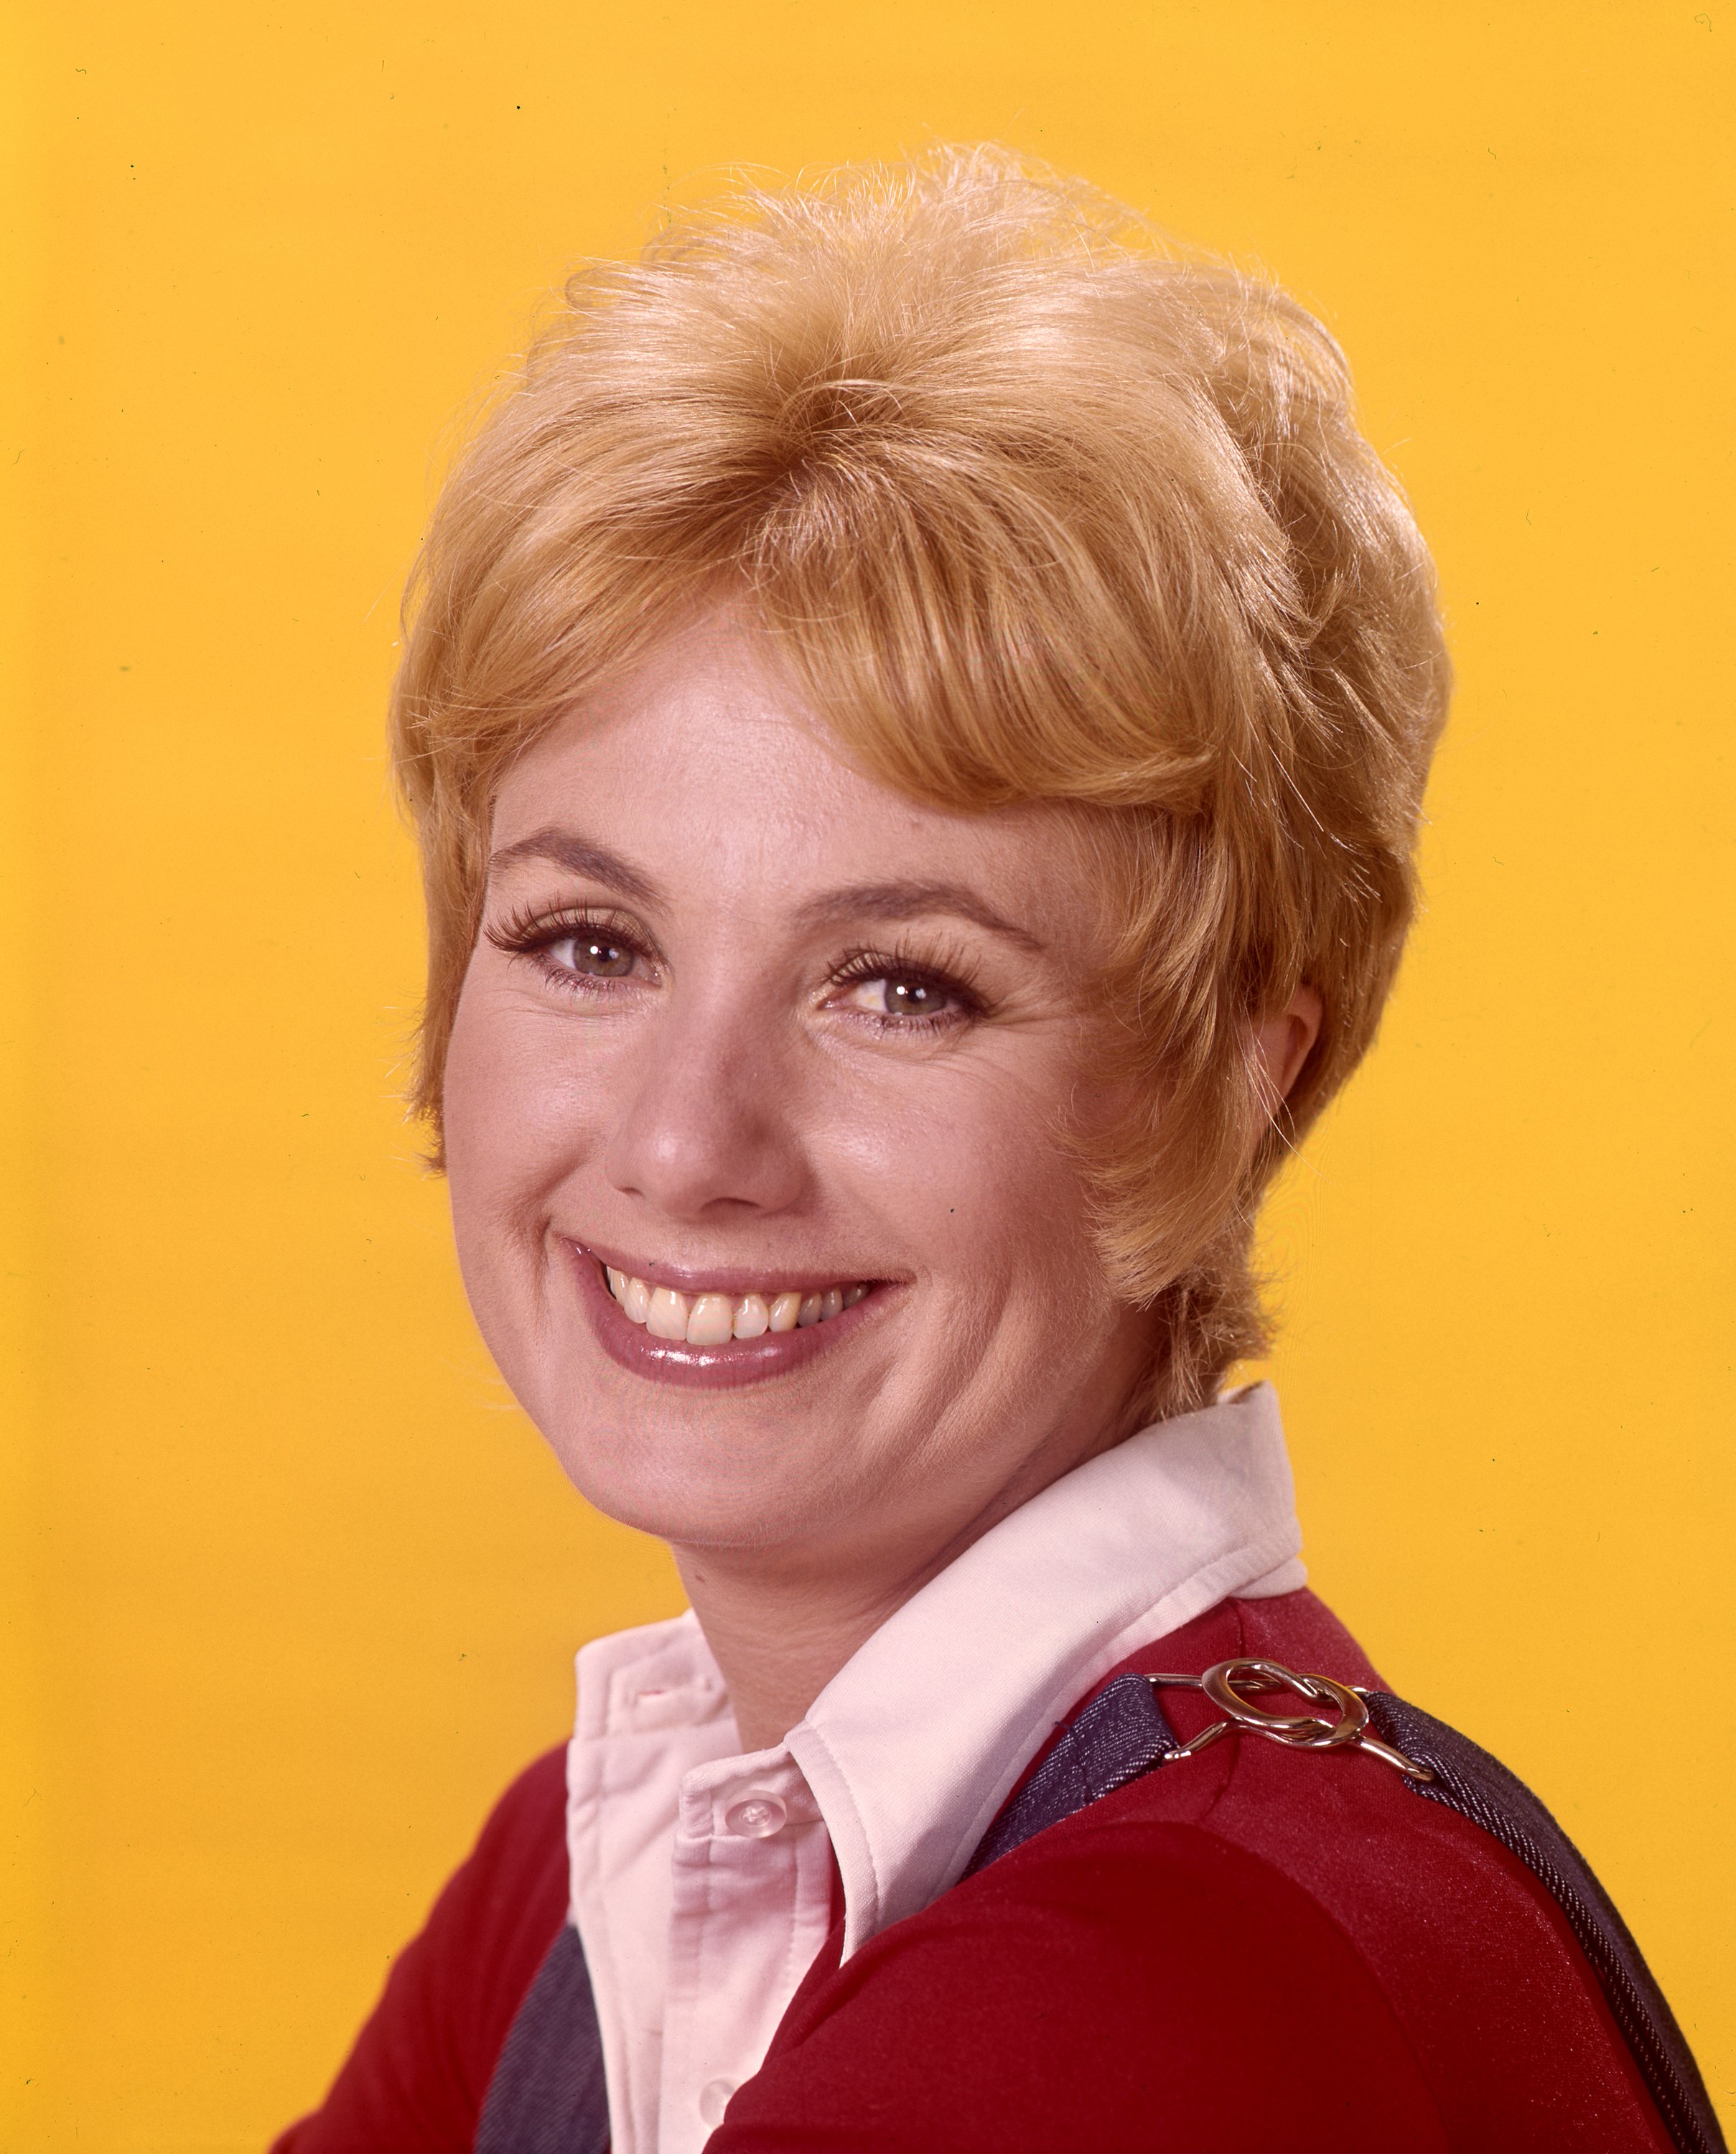 Shirley Jones aka Shirley Partridge from "The Partridge Family." | Source: Getty Images